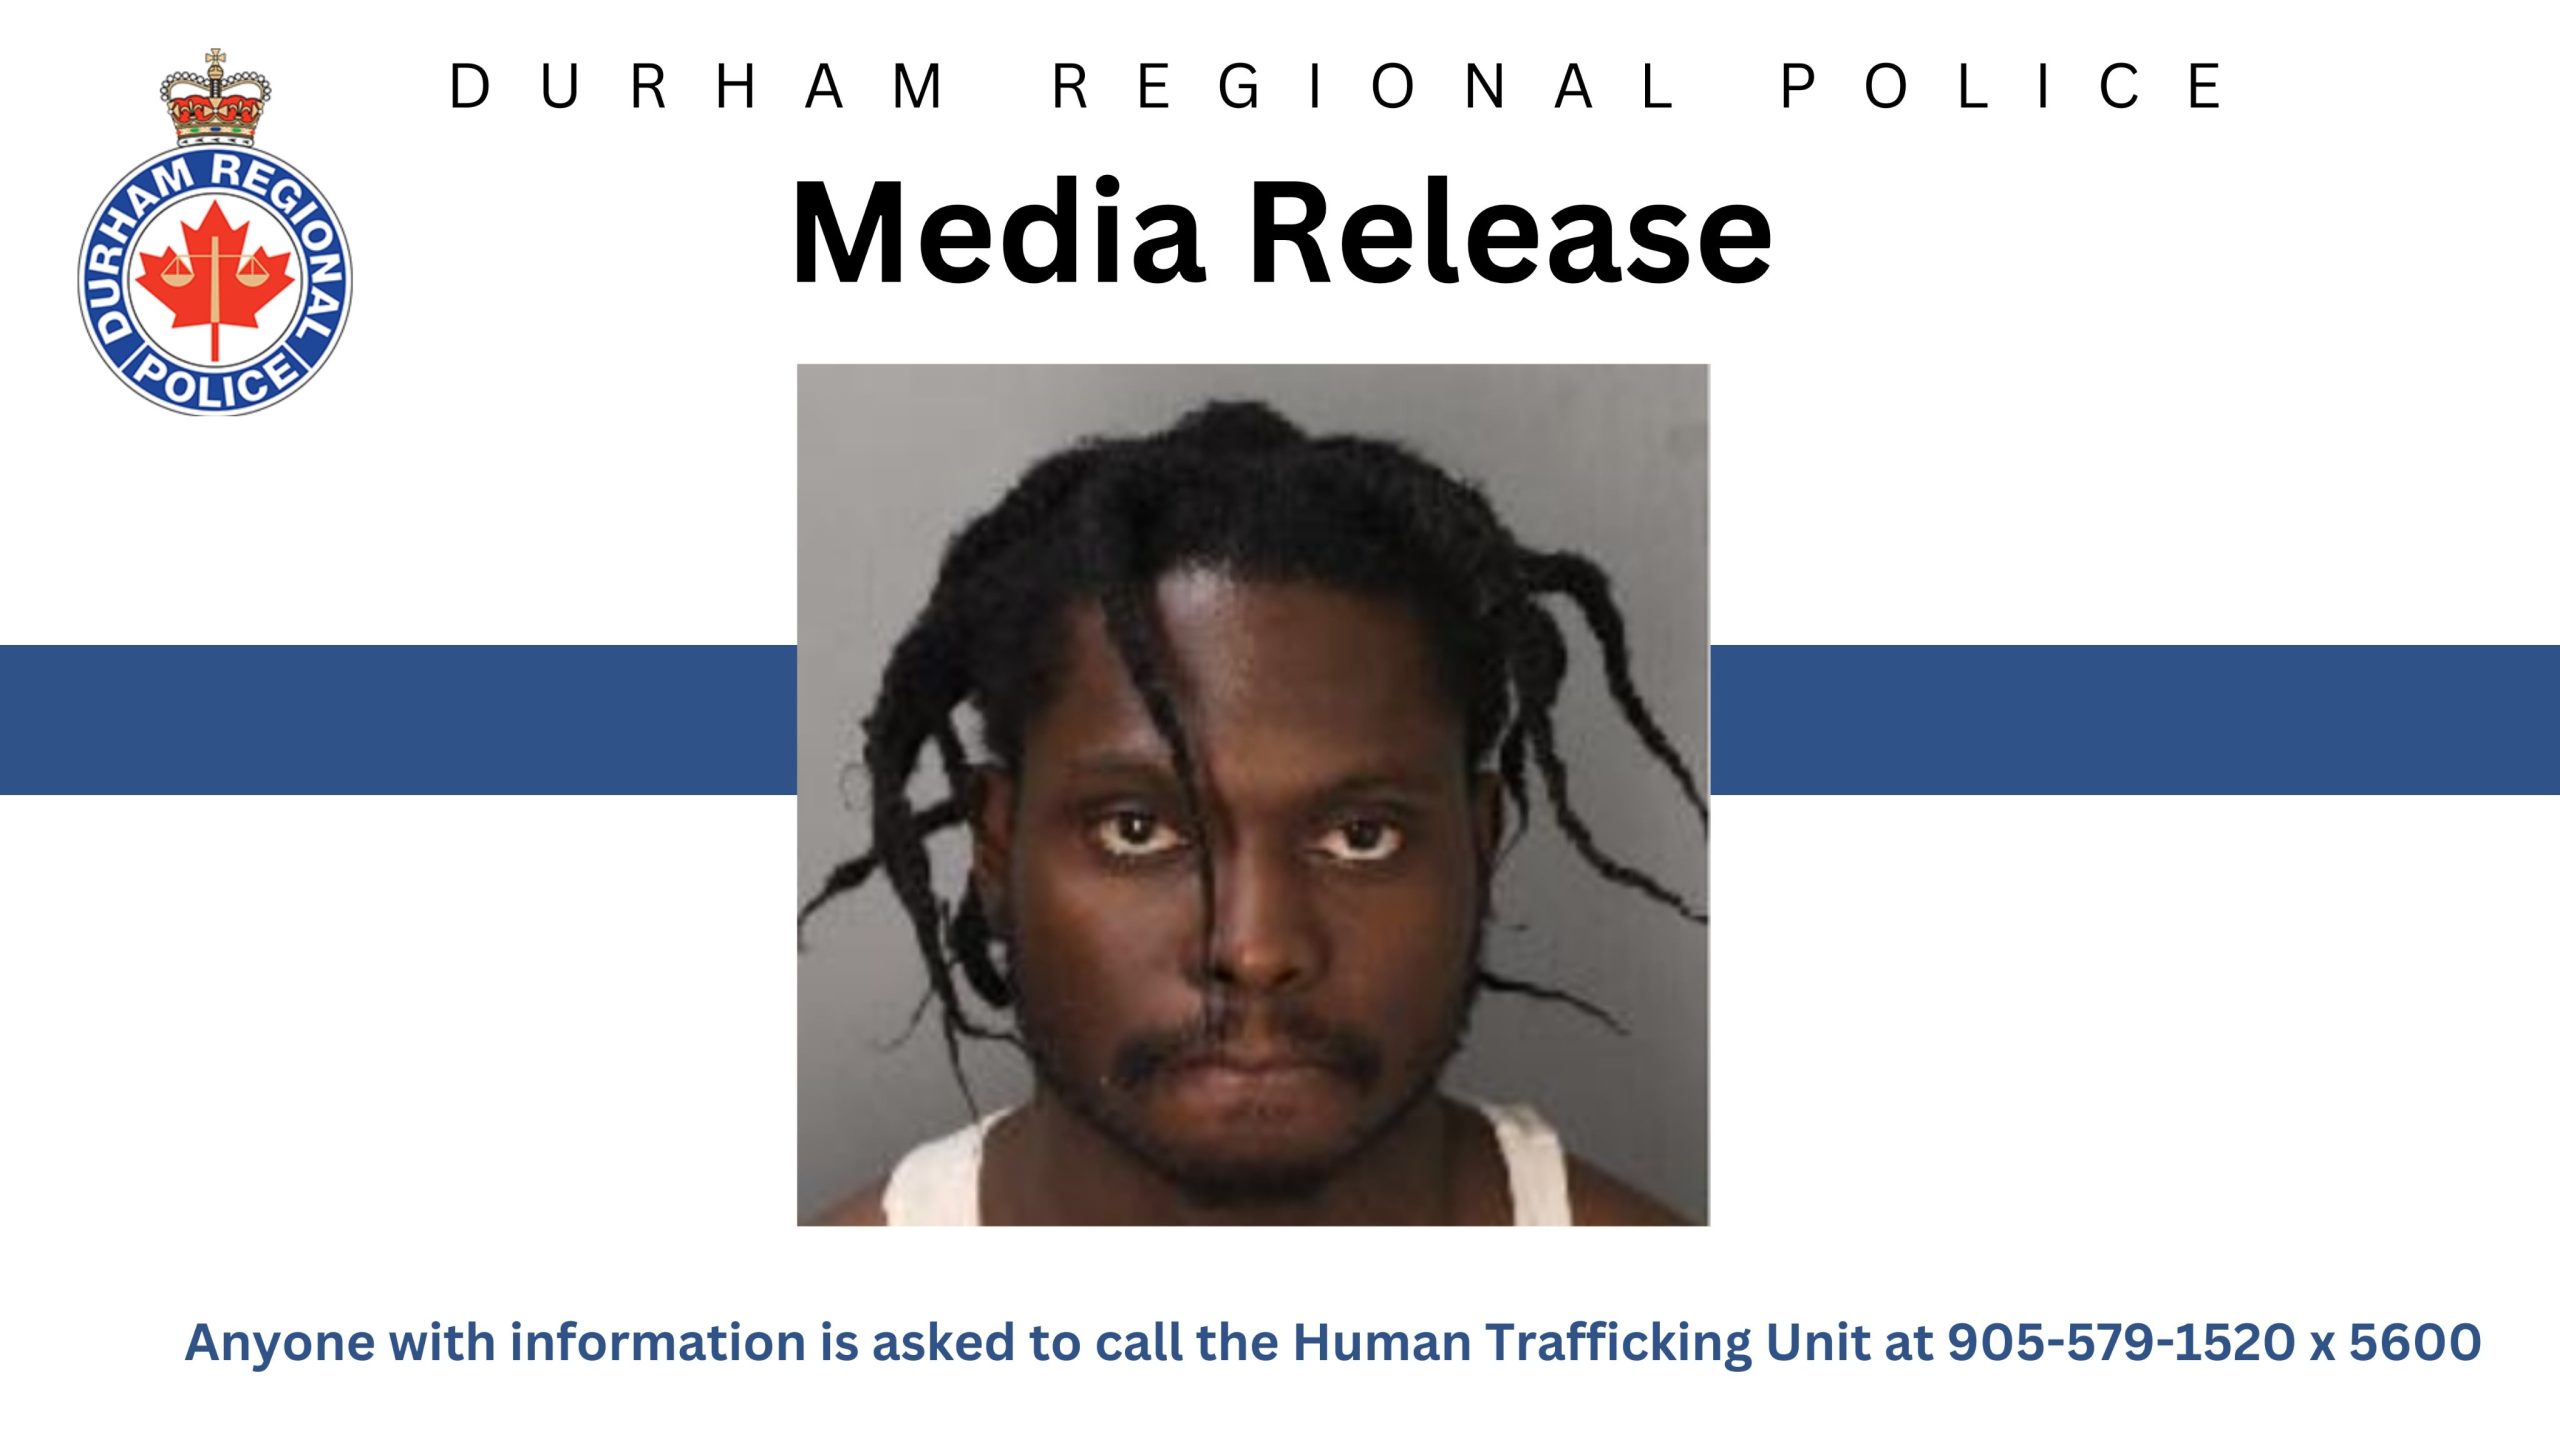 Tajae Ried, 23 of Toronto, is charged with human trafficking